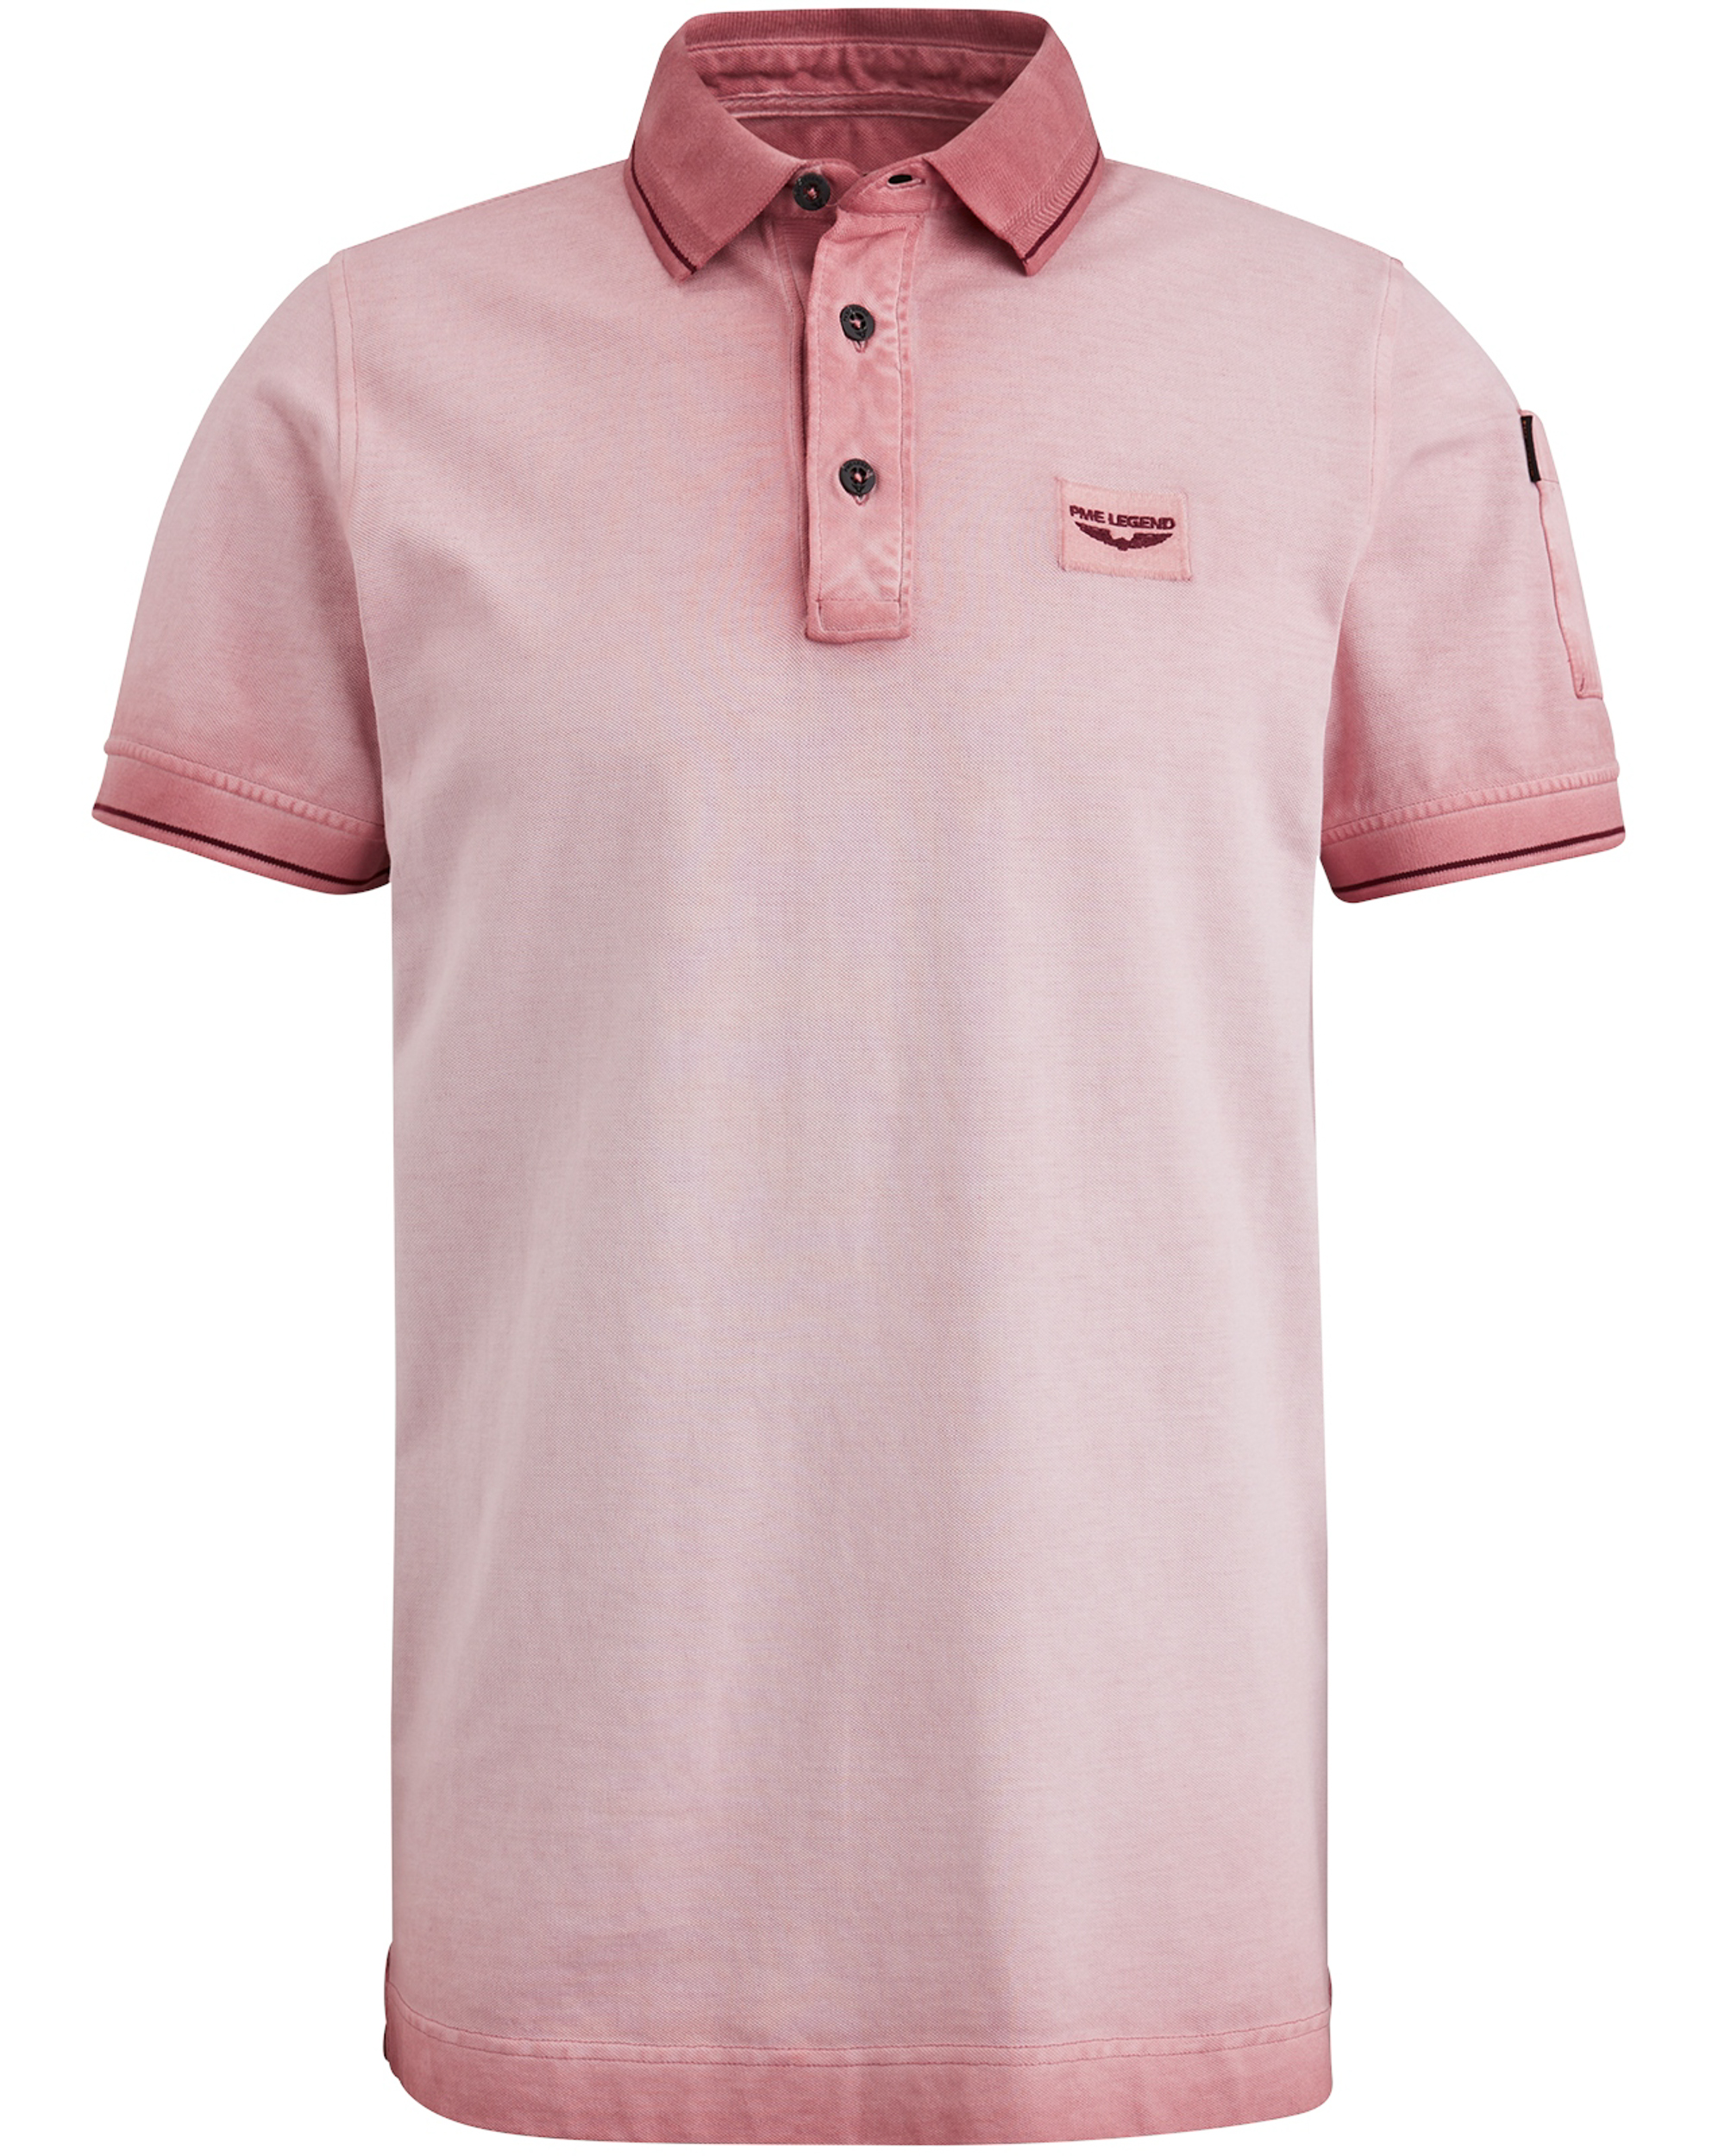 PME Legend Polo met cold dye wassing